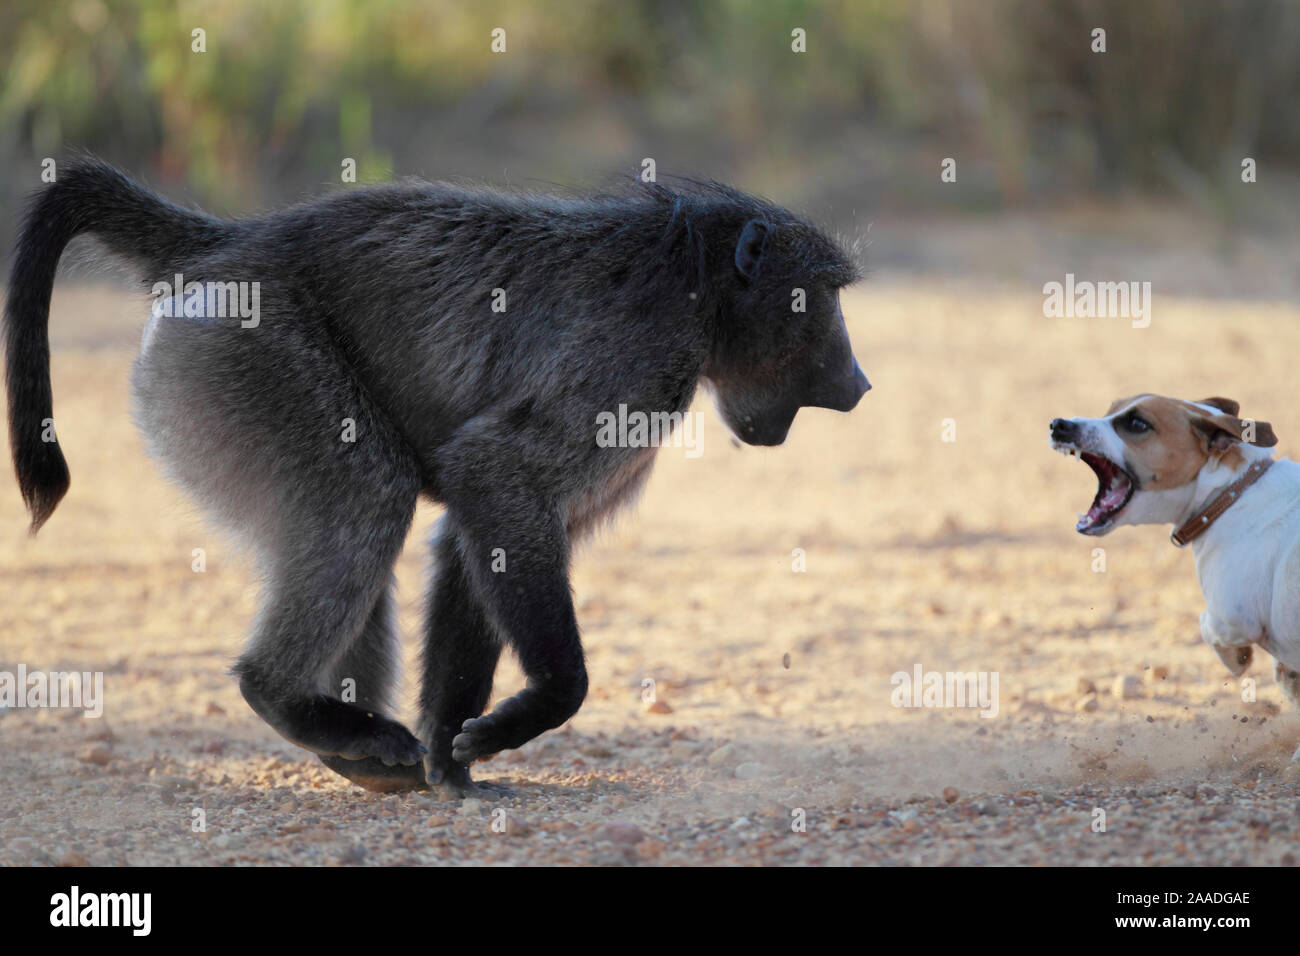 Chacma baboon (Papio ursinus) fighting with dog, South Africa Stock Photo